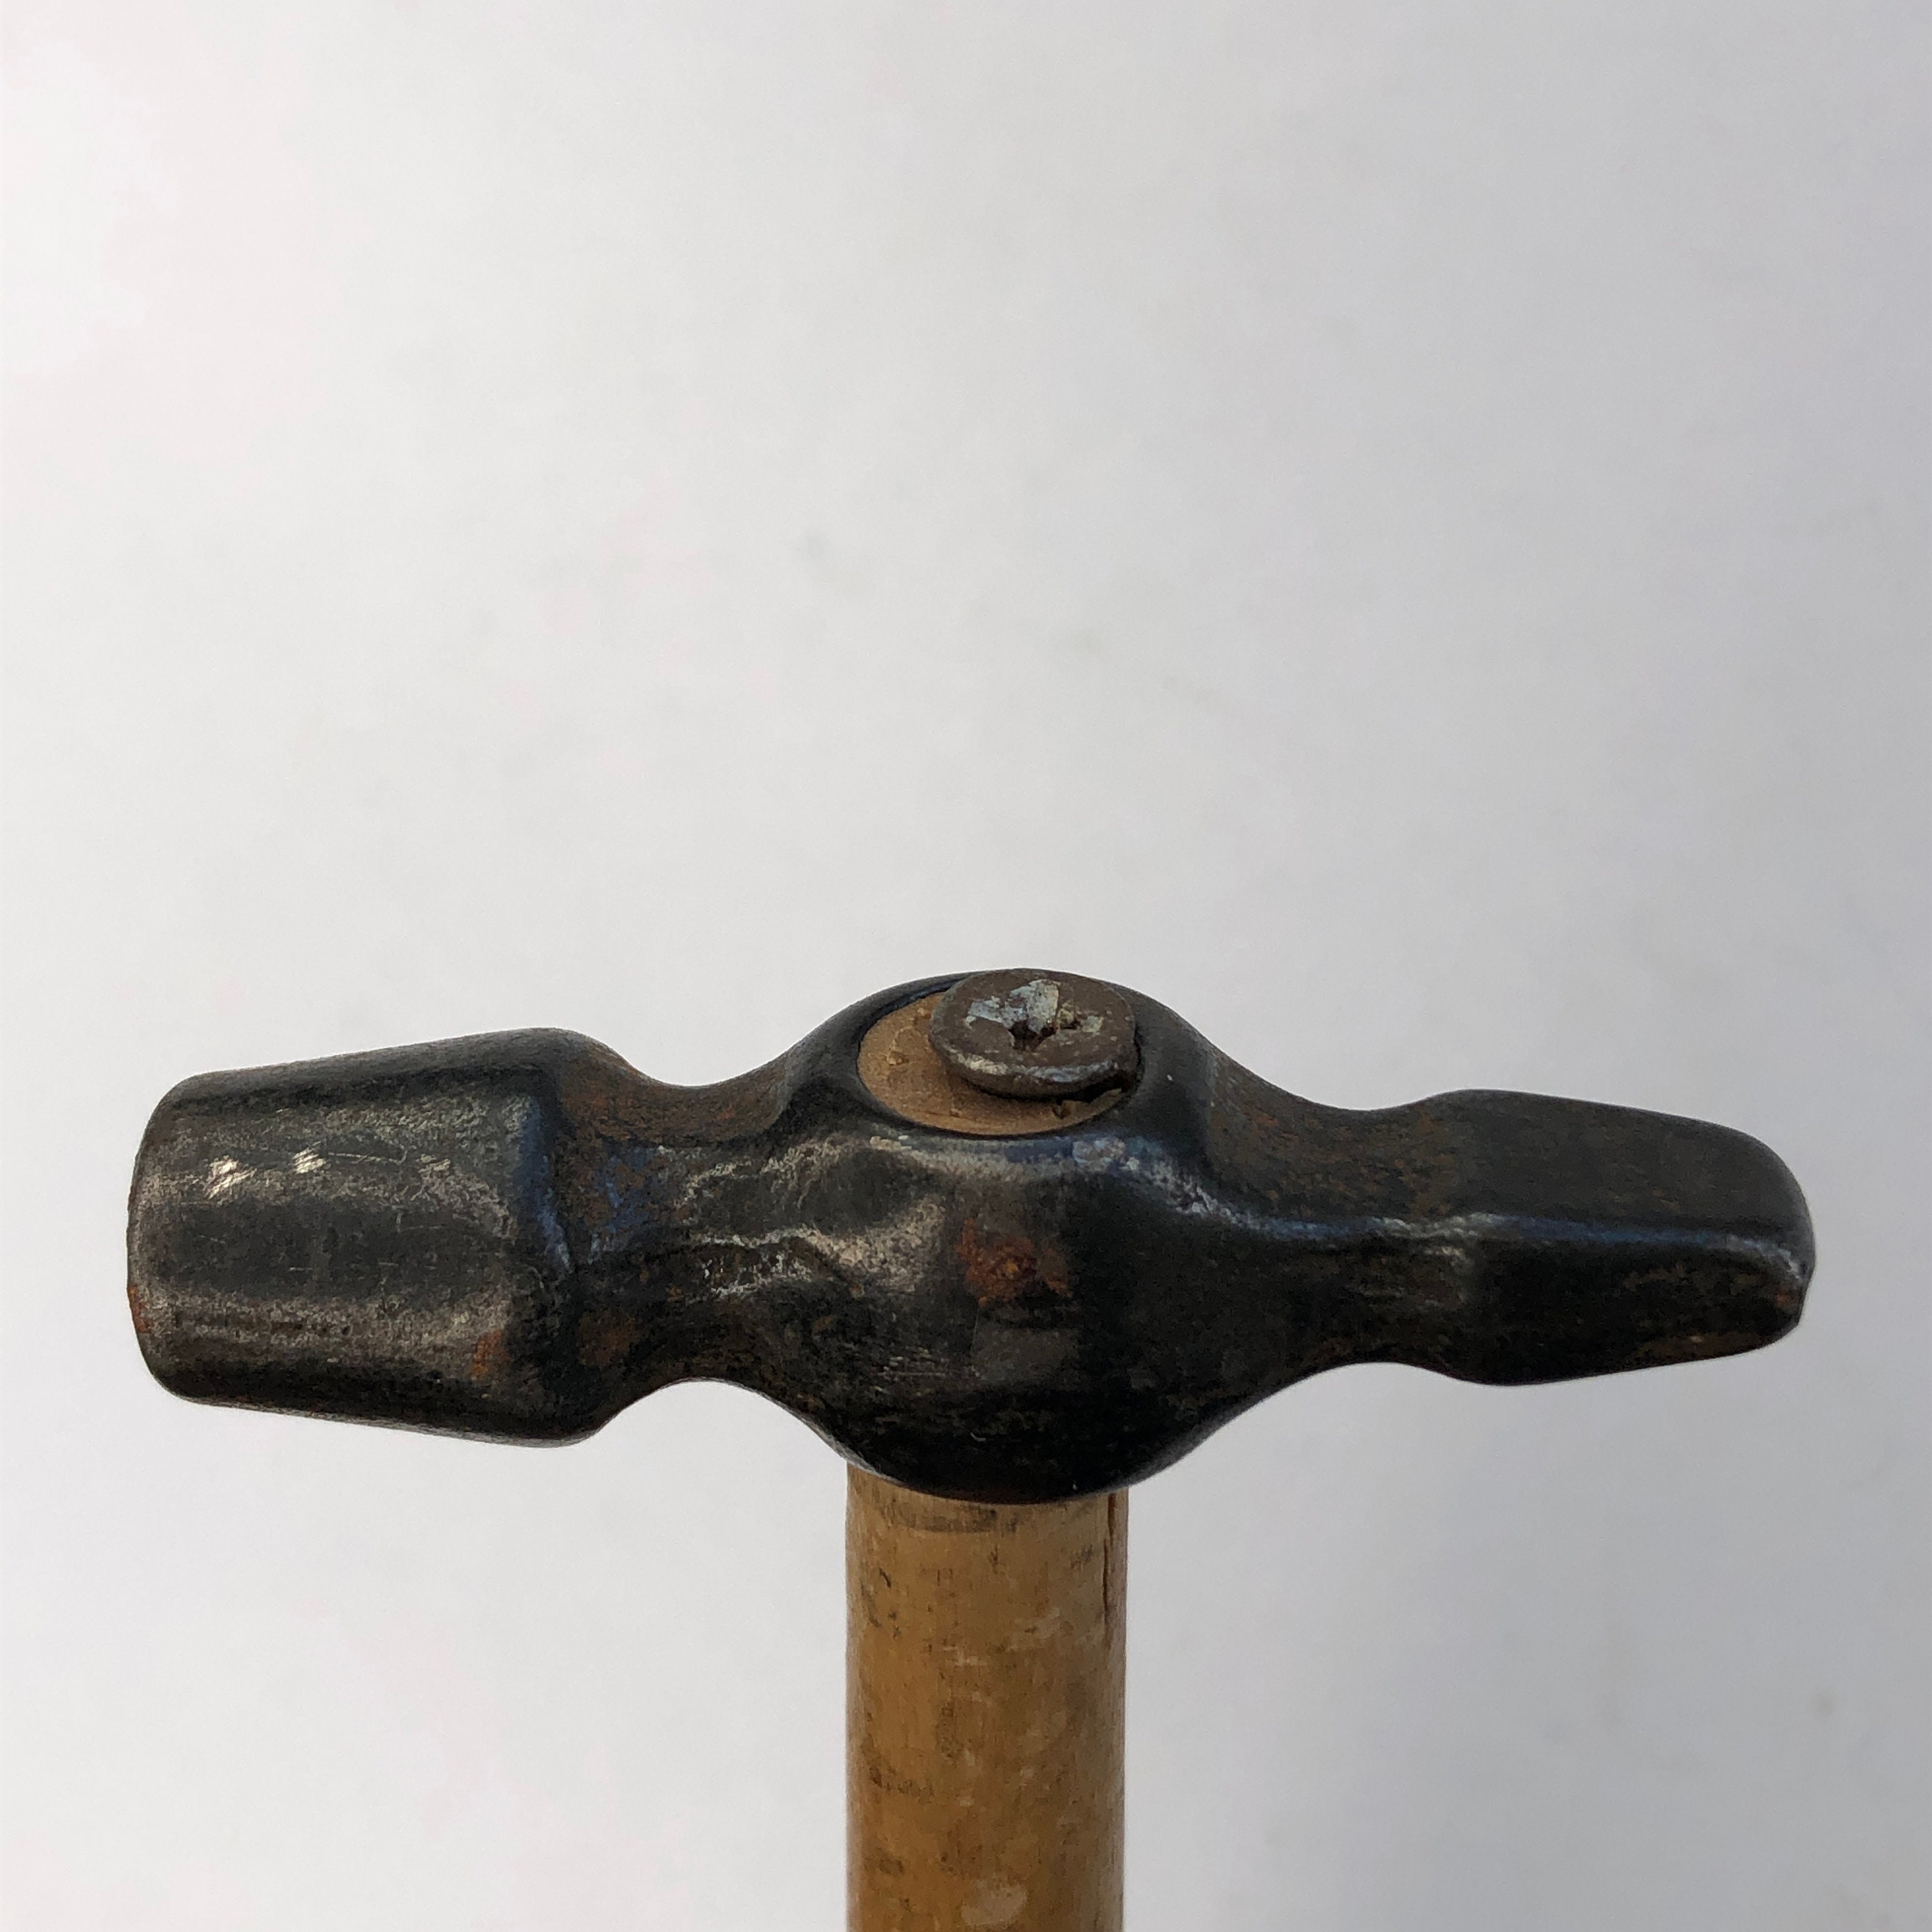 Tiny unmarked watchmaker’s hammer